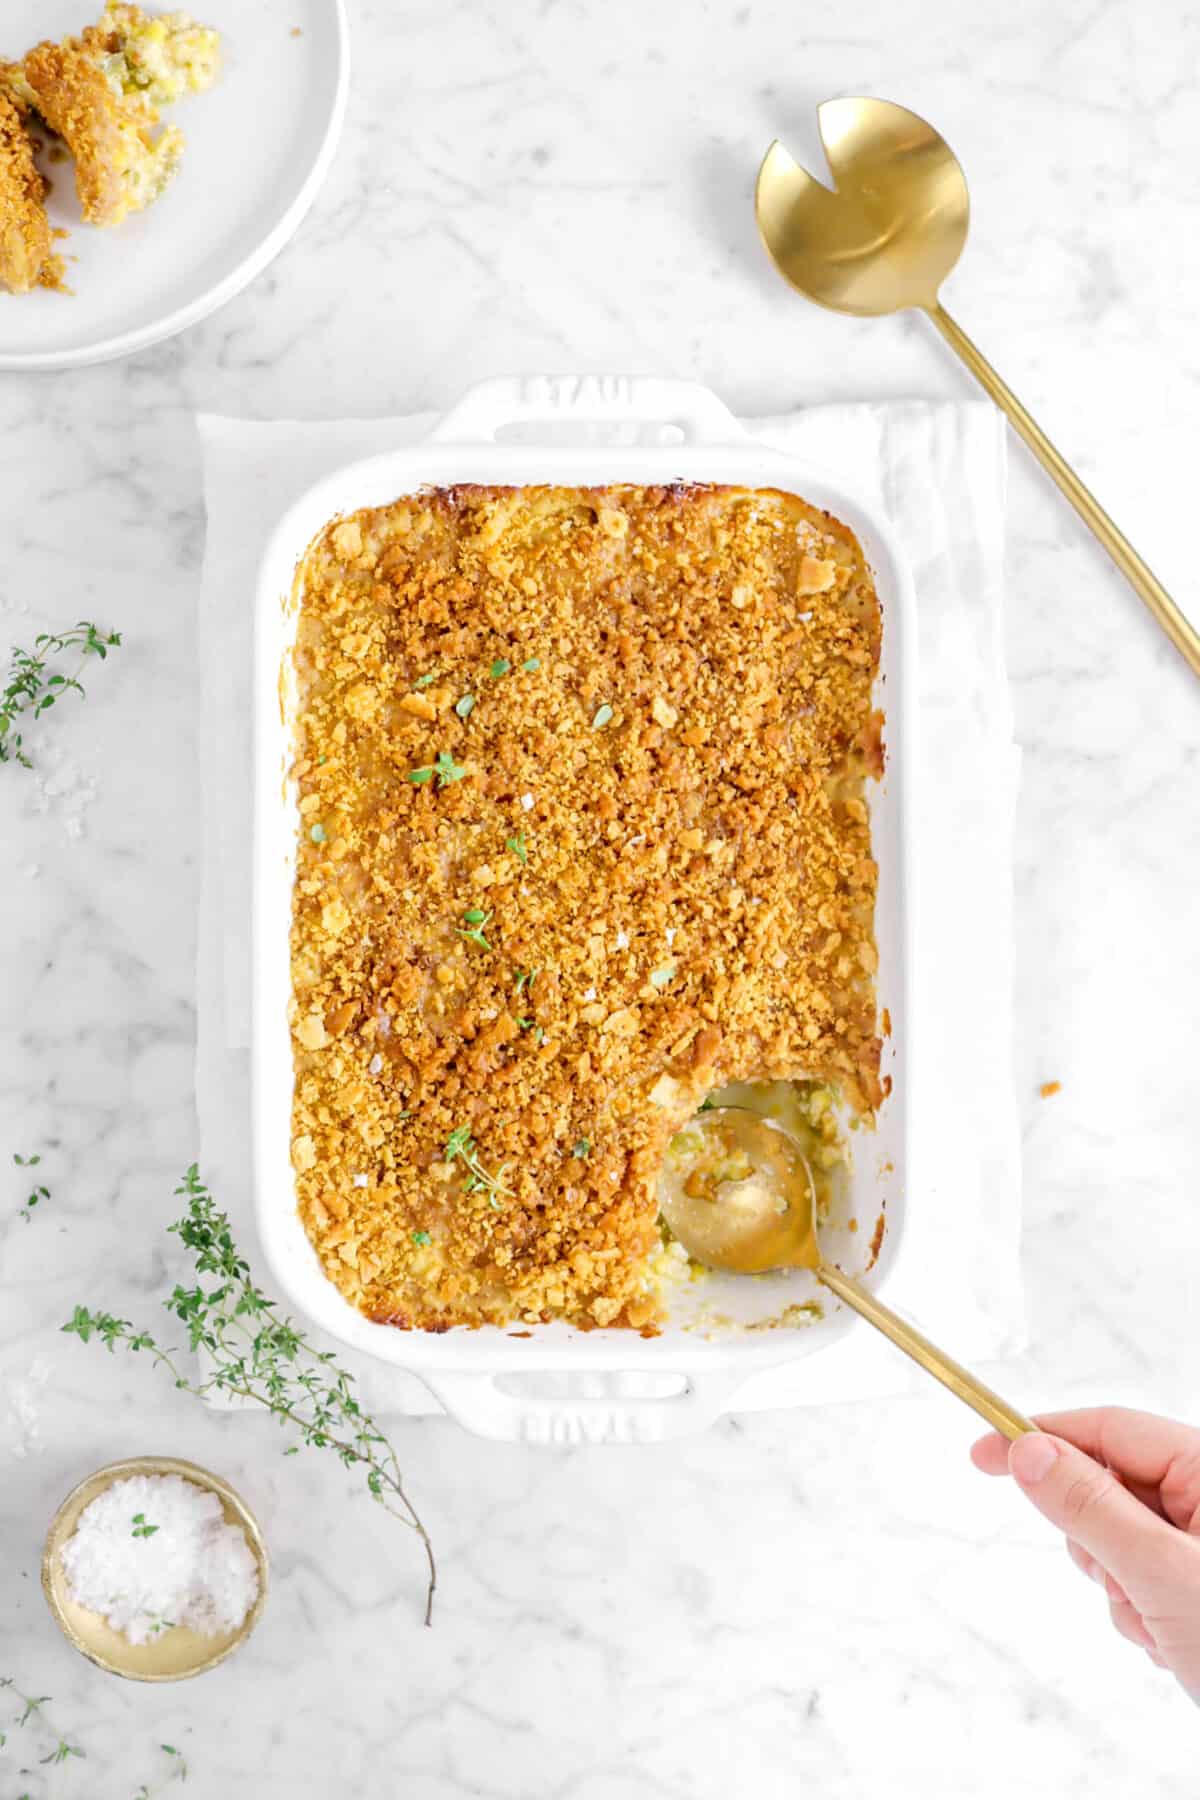 gold spoon digging out slice of shoepeg corn casserole